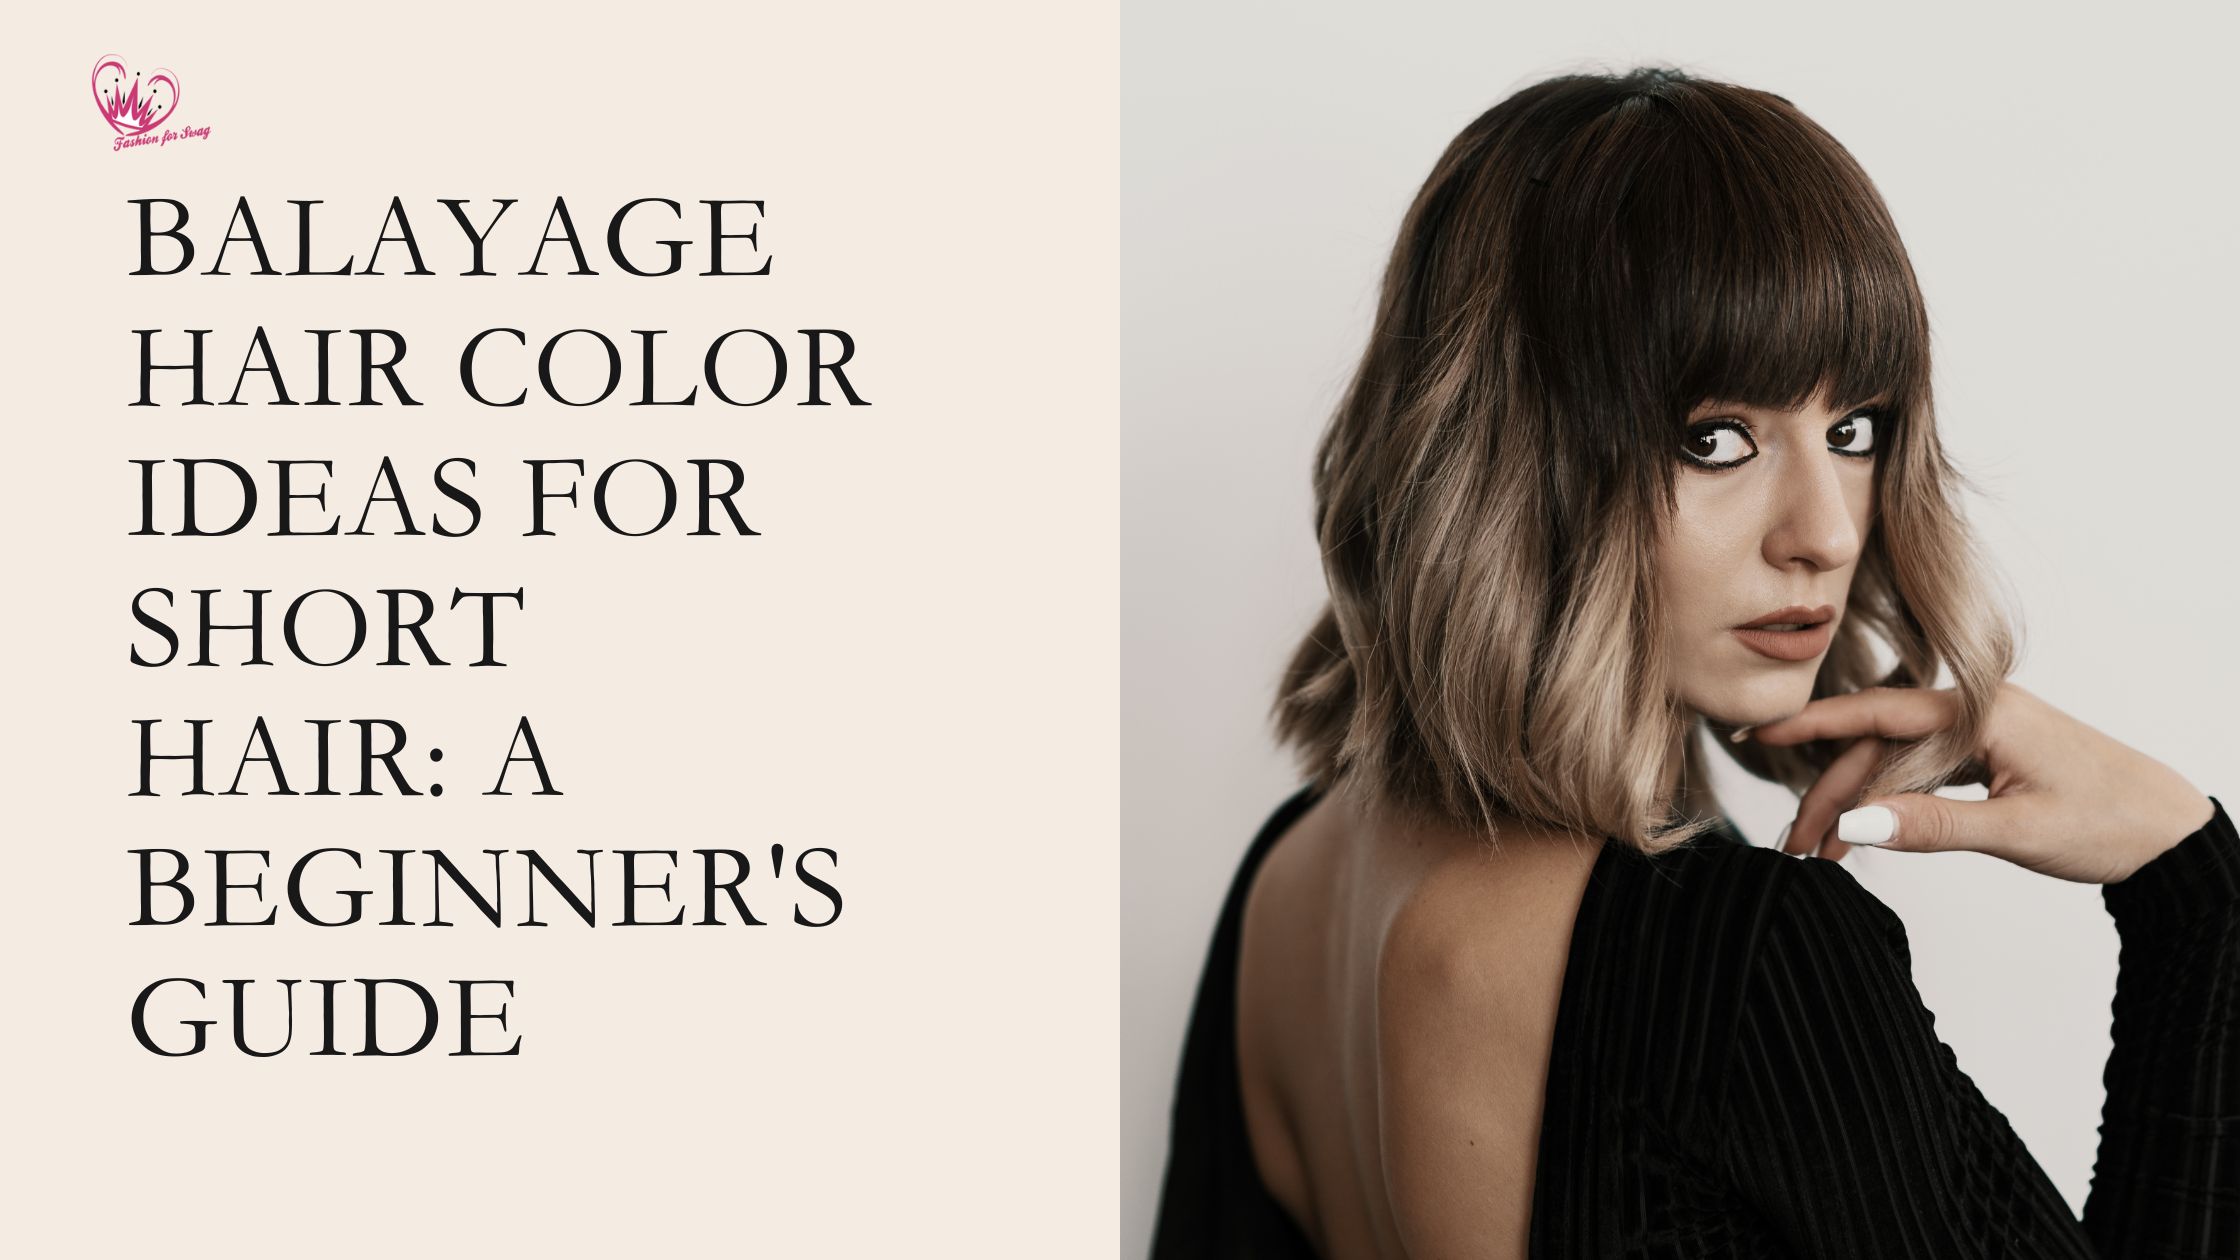 Balayage Hair Color Ideas for Short Hair: A Beginner’s Guide